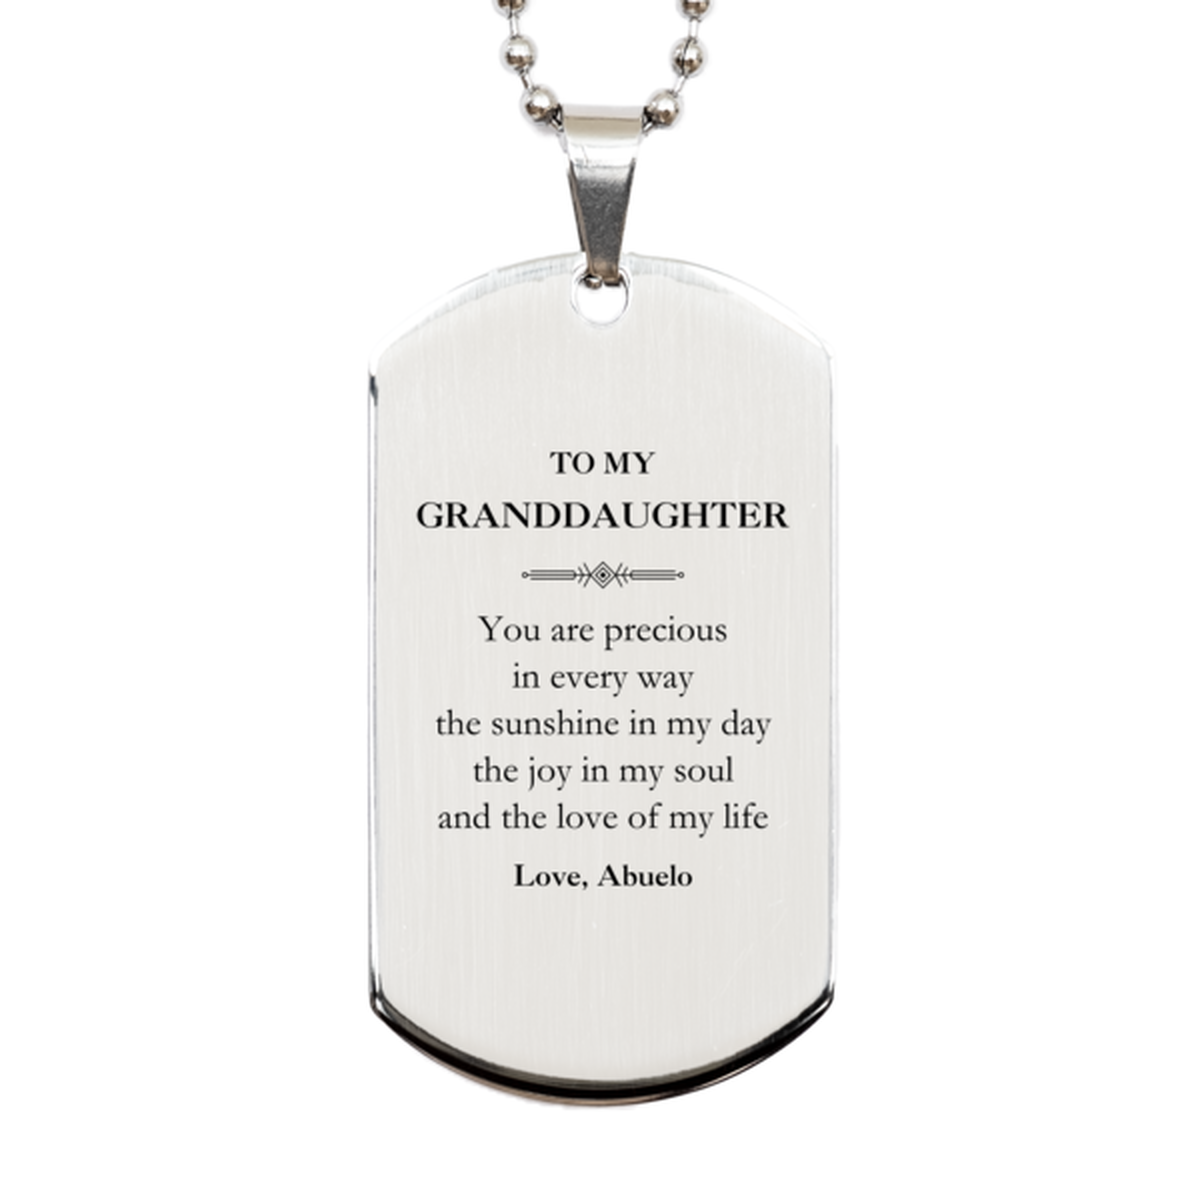 Graduation Gifts for Granddaughter Silver Dog Tag Present from Abuelo, Christmas Granddaughter Birthday Gifts Granddaughter You are precious in every way the sunshine in my day. Love, Abuelo